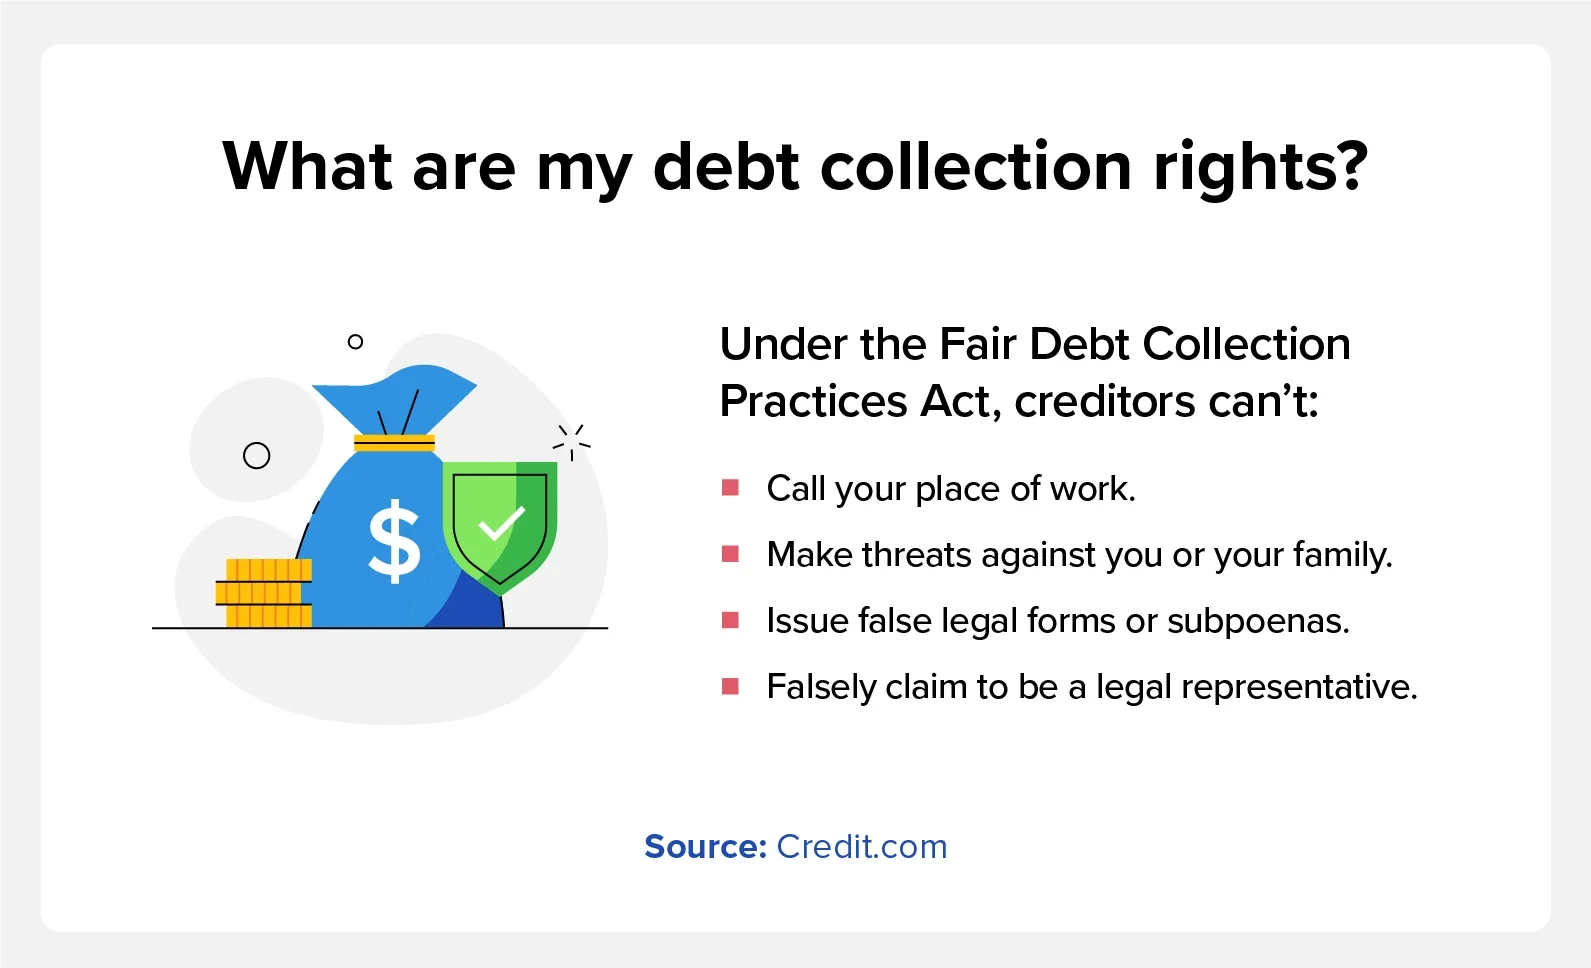 4 tips describing “what are my debt collection rights."